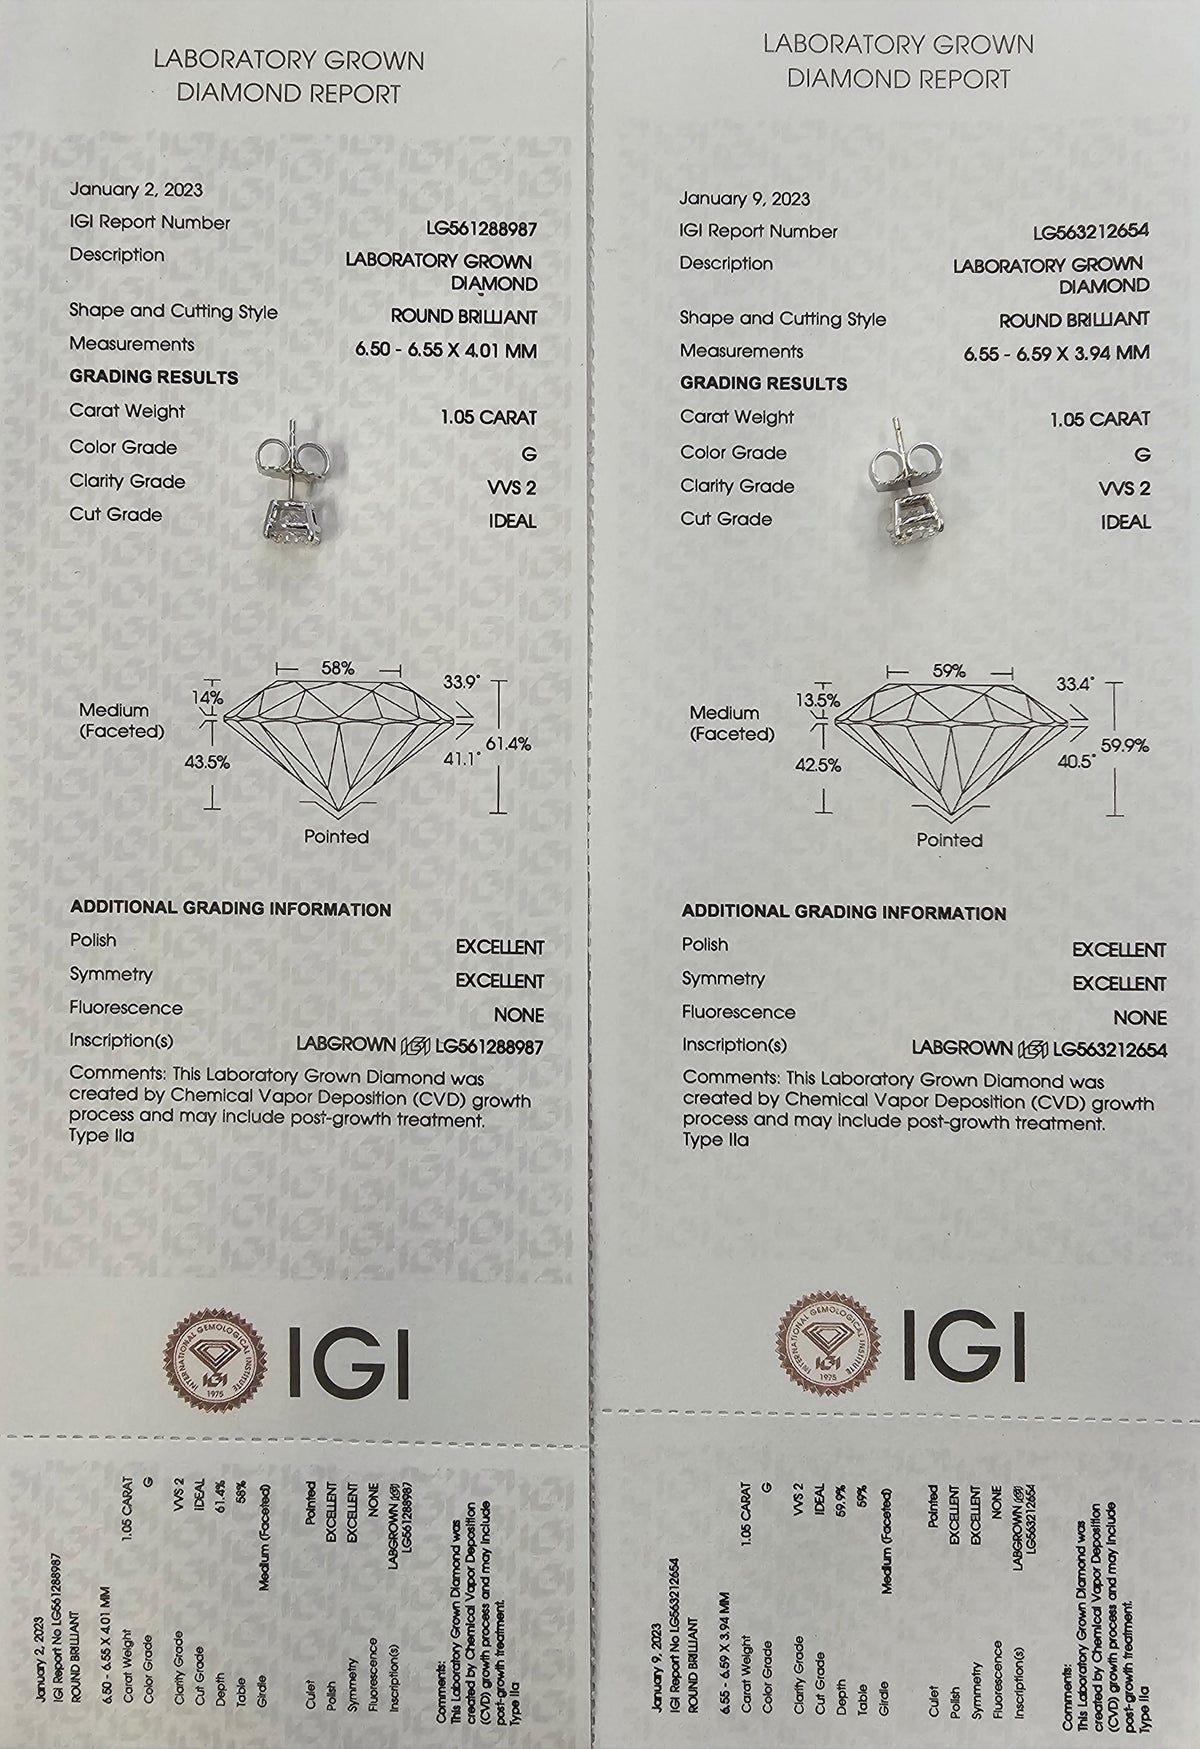 Laboratory Grown Diamond Stud Earrings, 2.10 Total Carat Weight, Set in 14kt White Gold